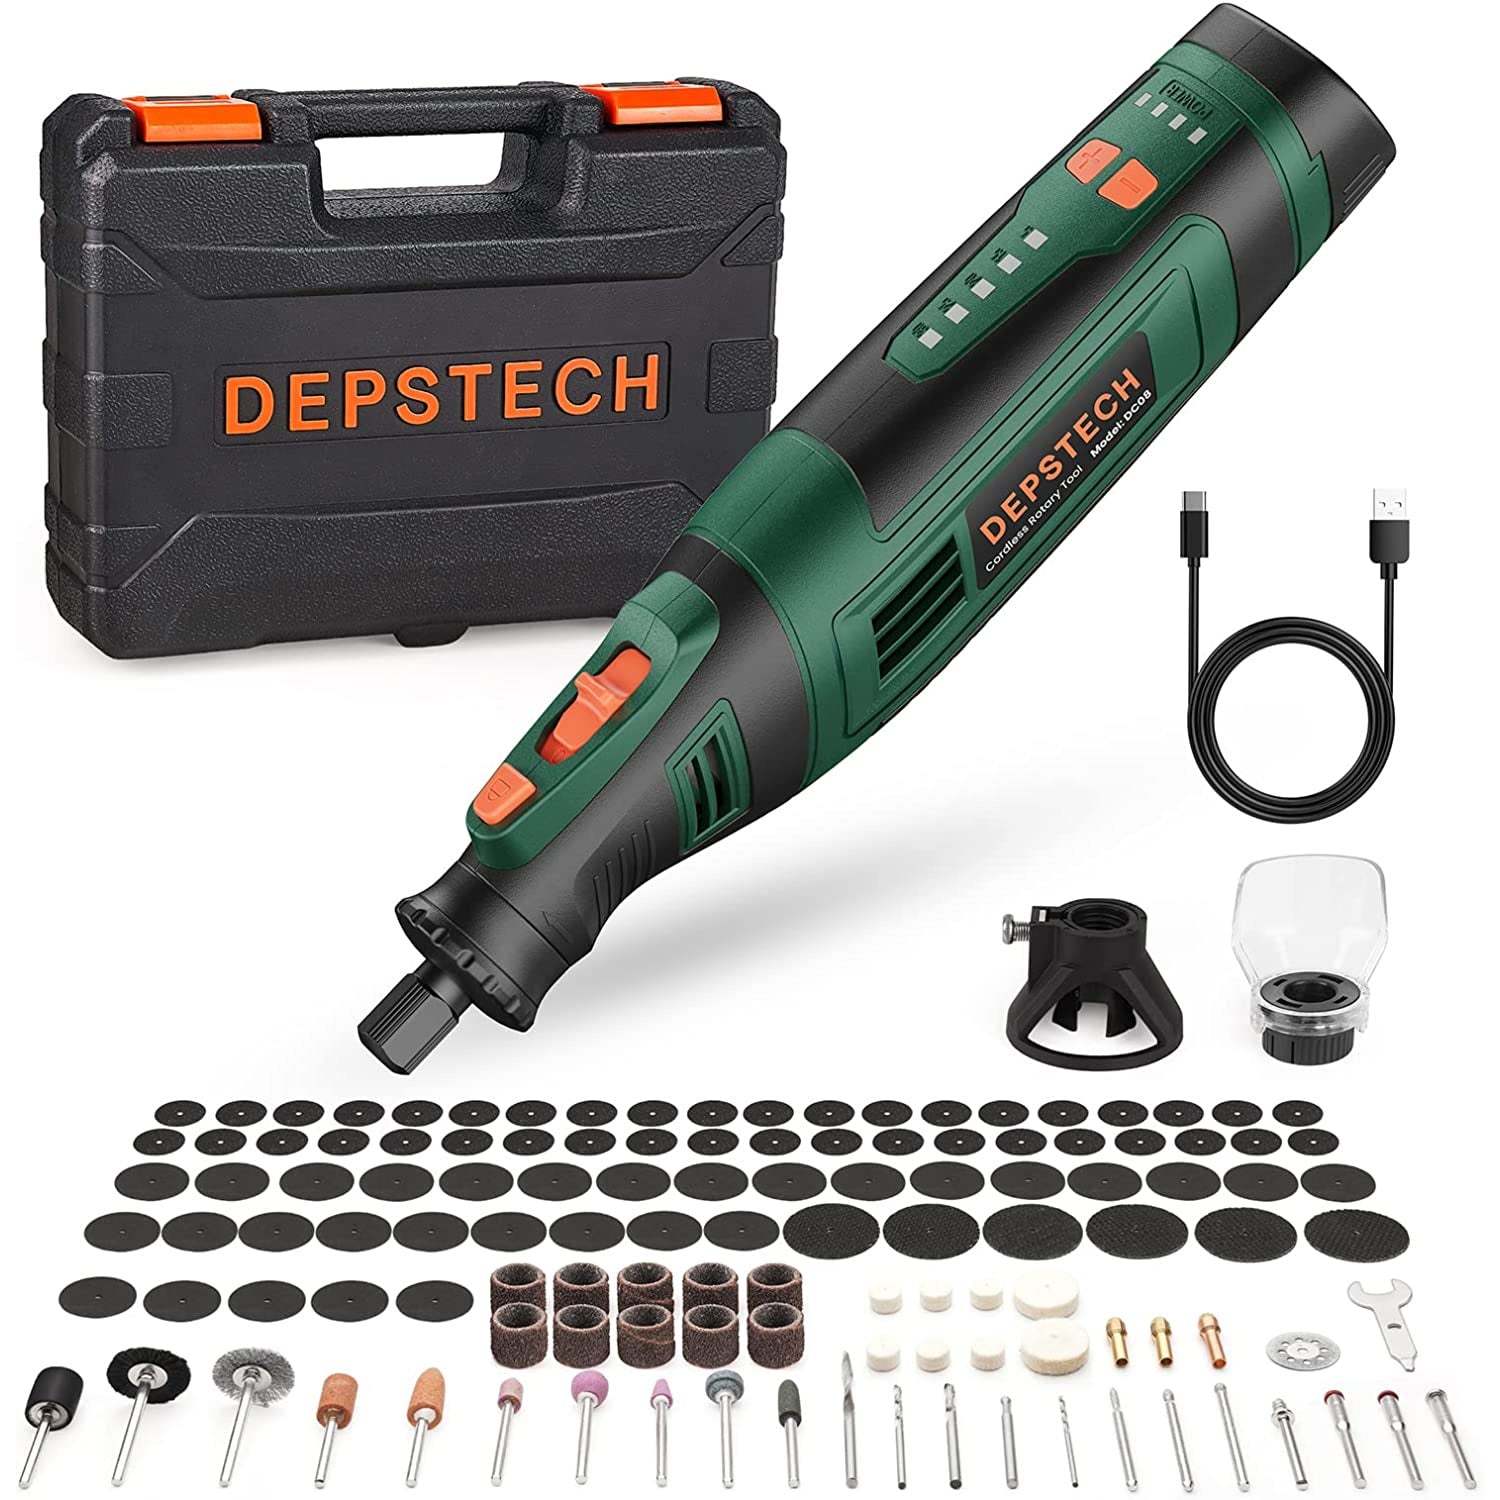 Rotary Tool Cordless Kit, 30000RPM Multi Power Carving Tools for Handyman